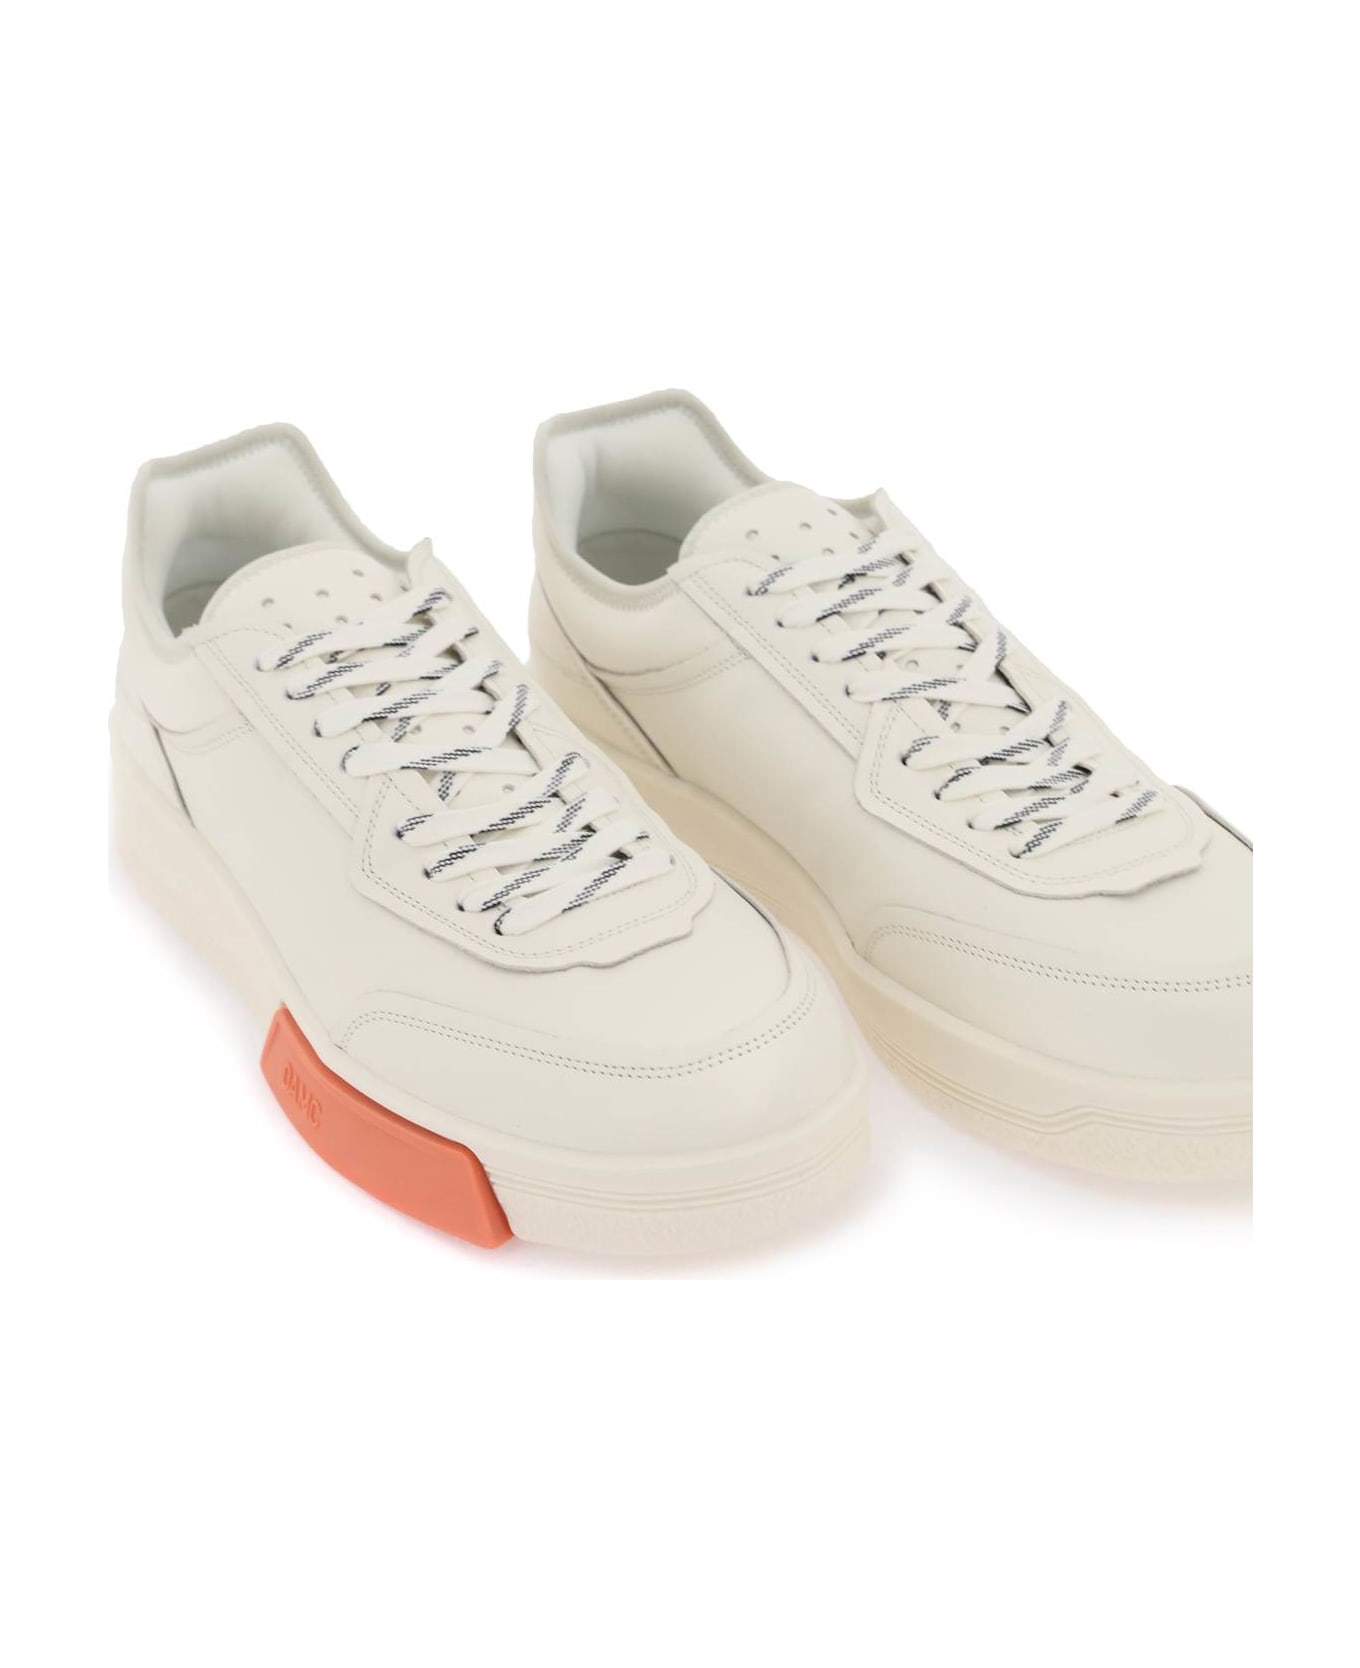 OAMC 'cosmos Cupsole' Sneakers - White